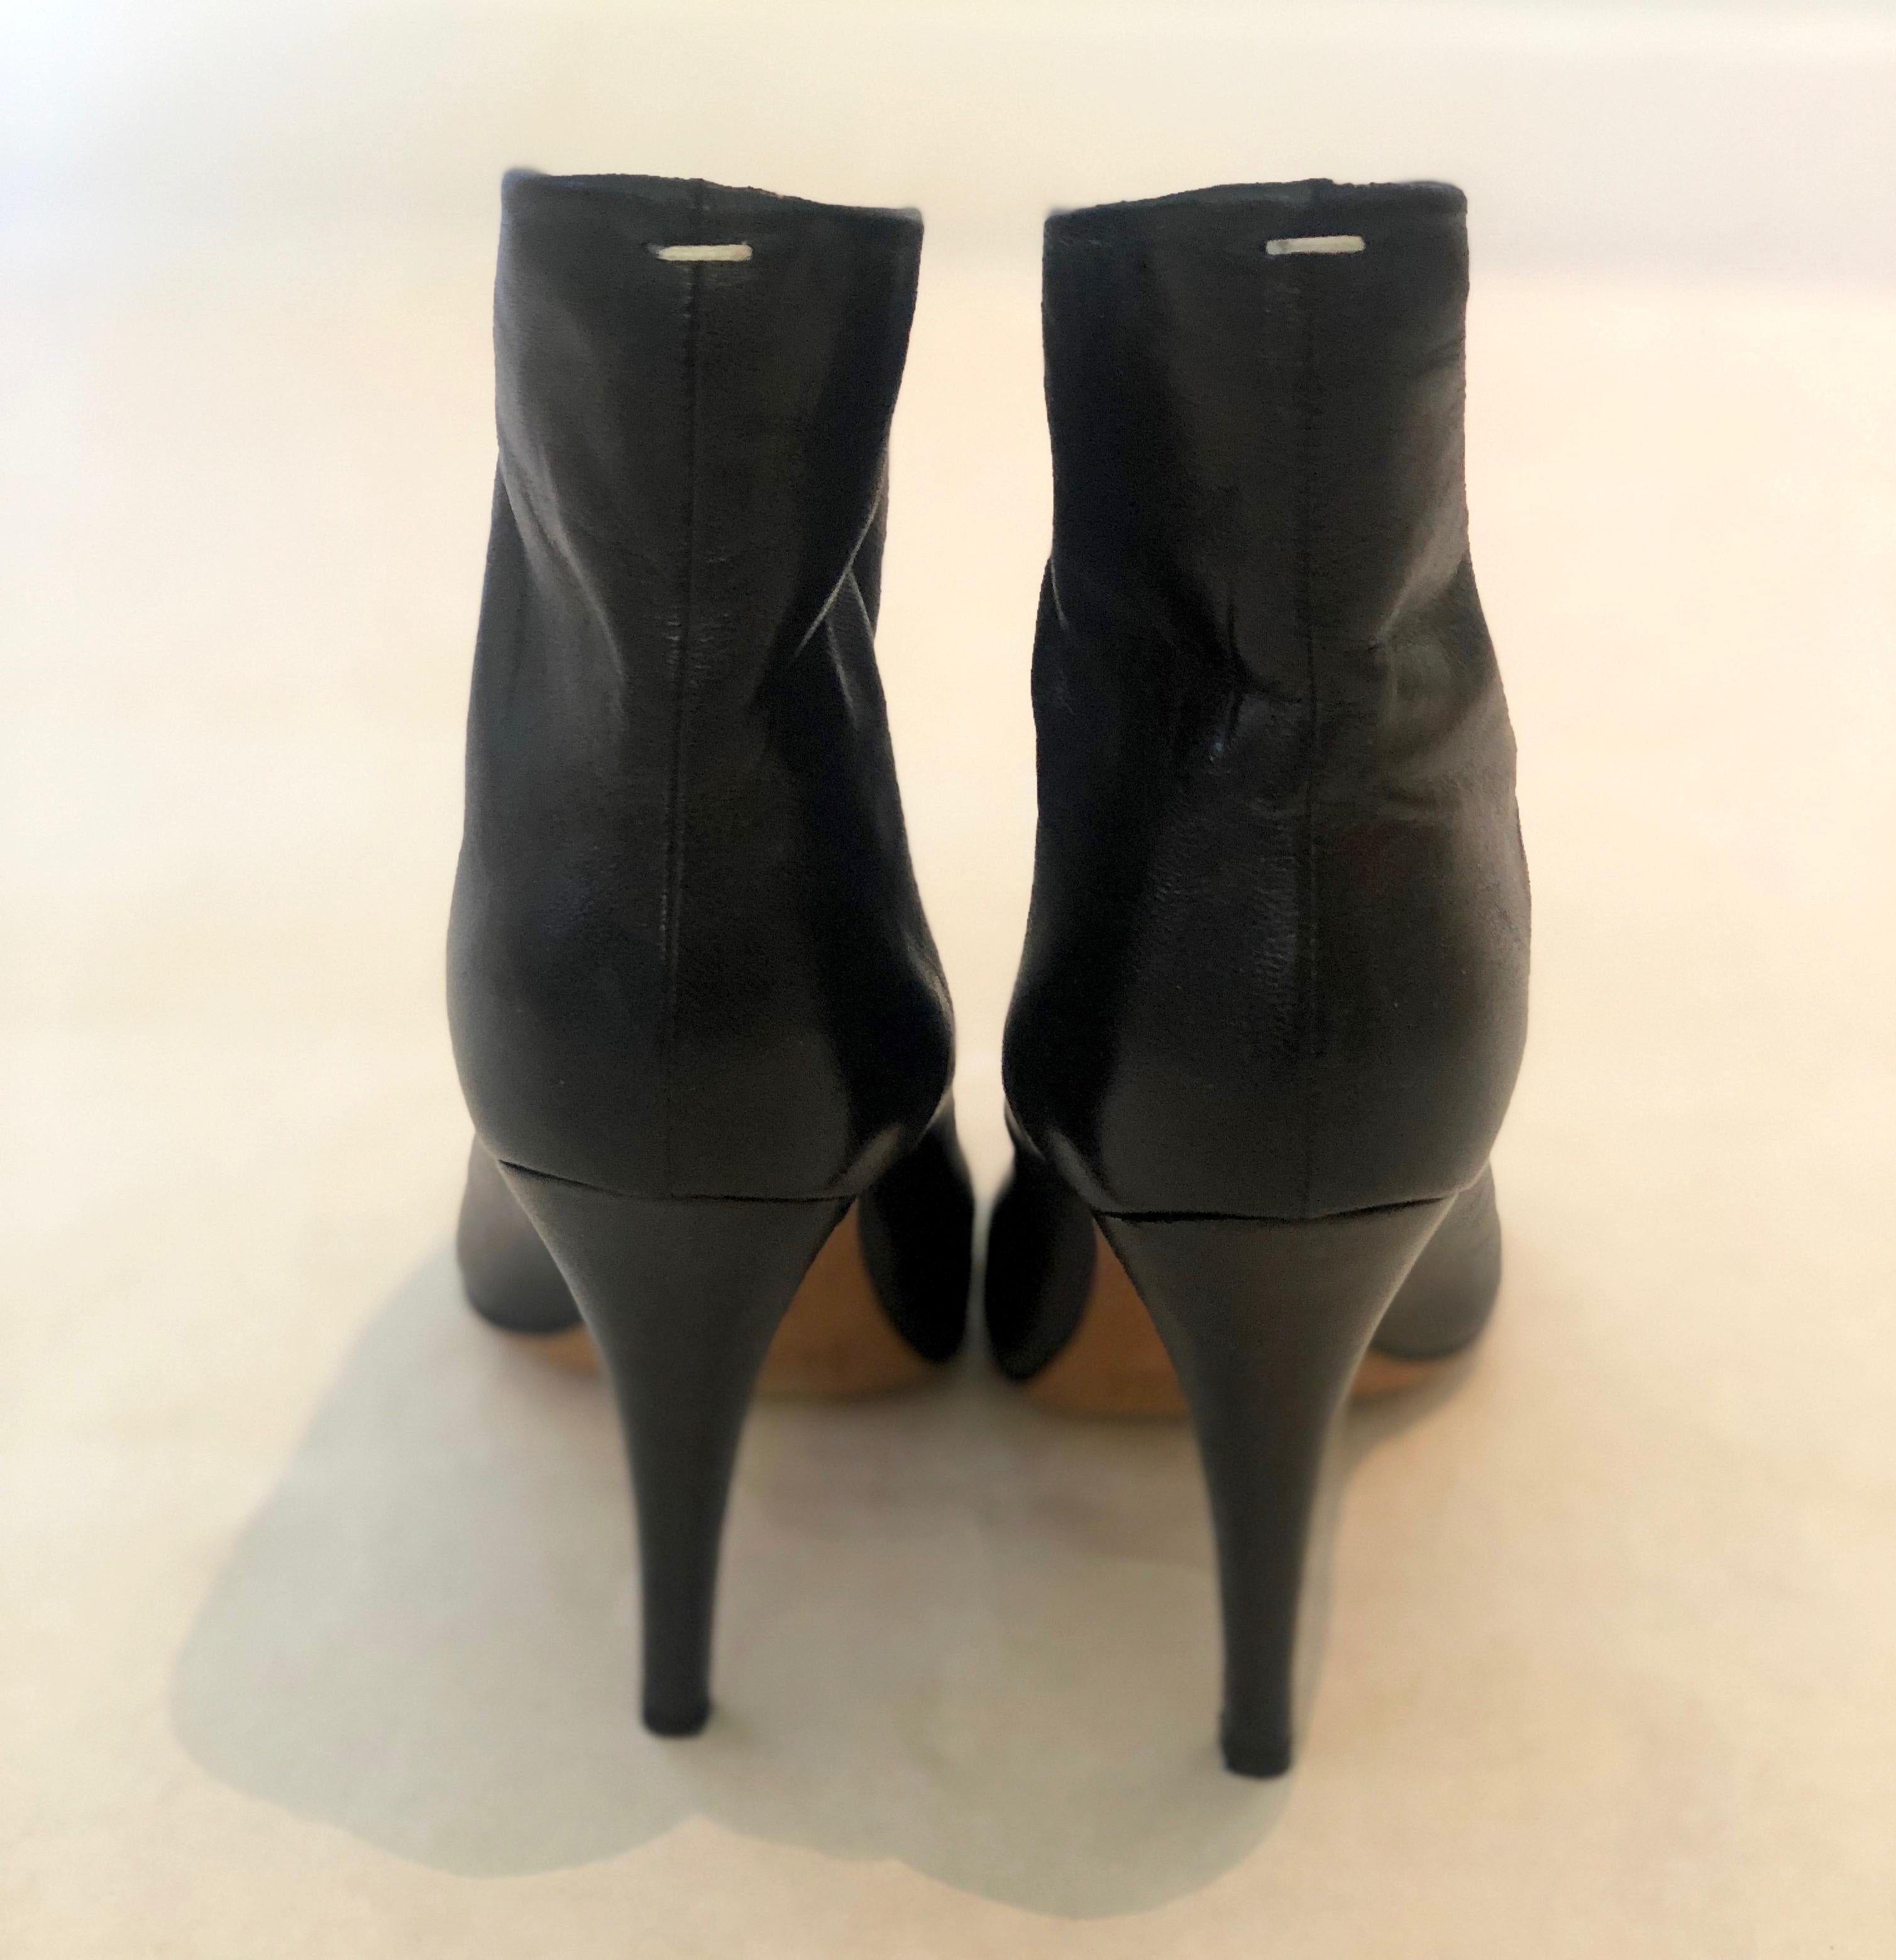 Pair of Maison Martin Margiala Black Open Toe Ankle Boots w/ Wide Unfitted Top  For Sale 4